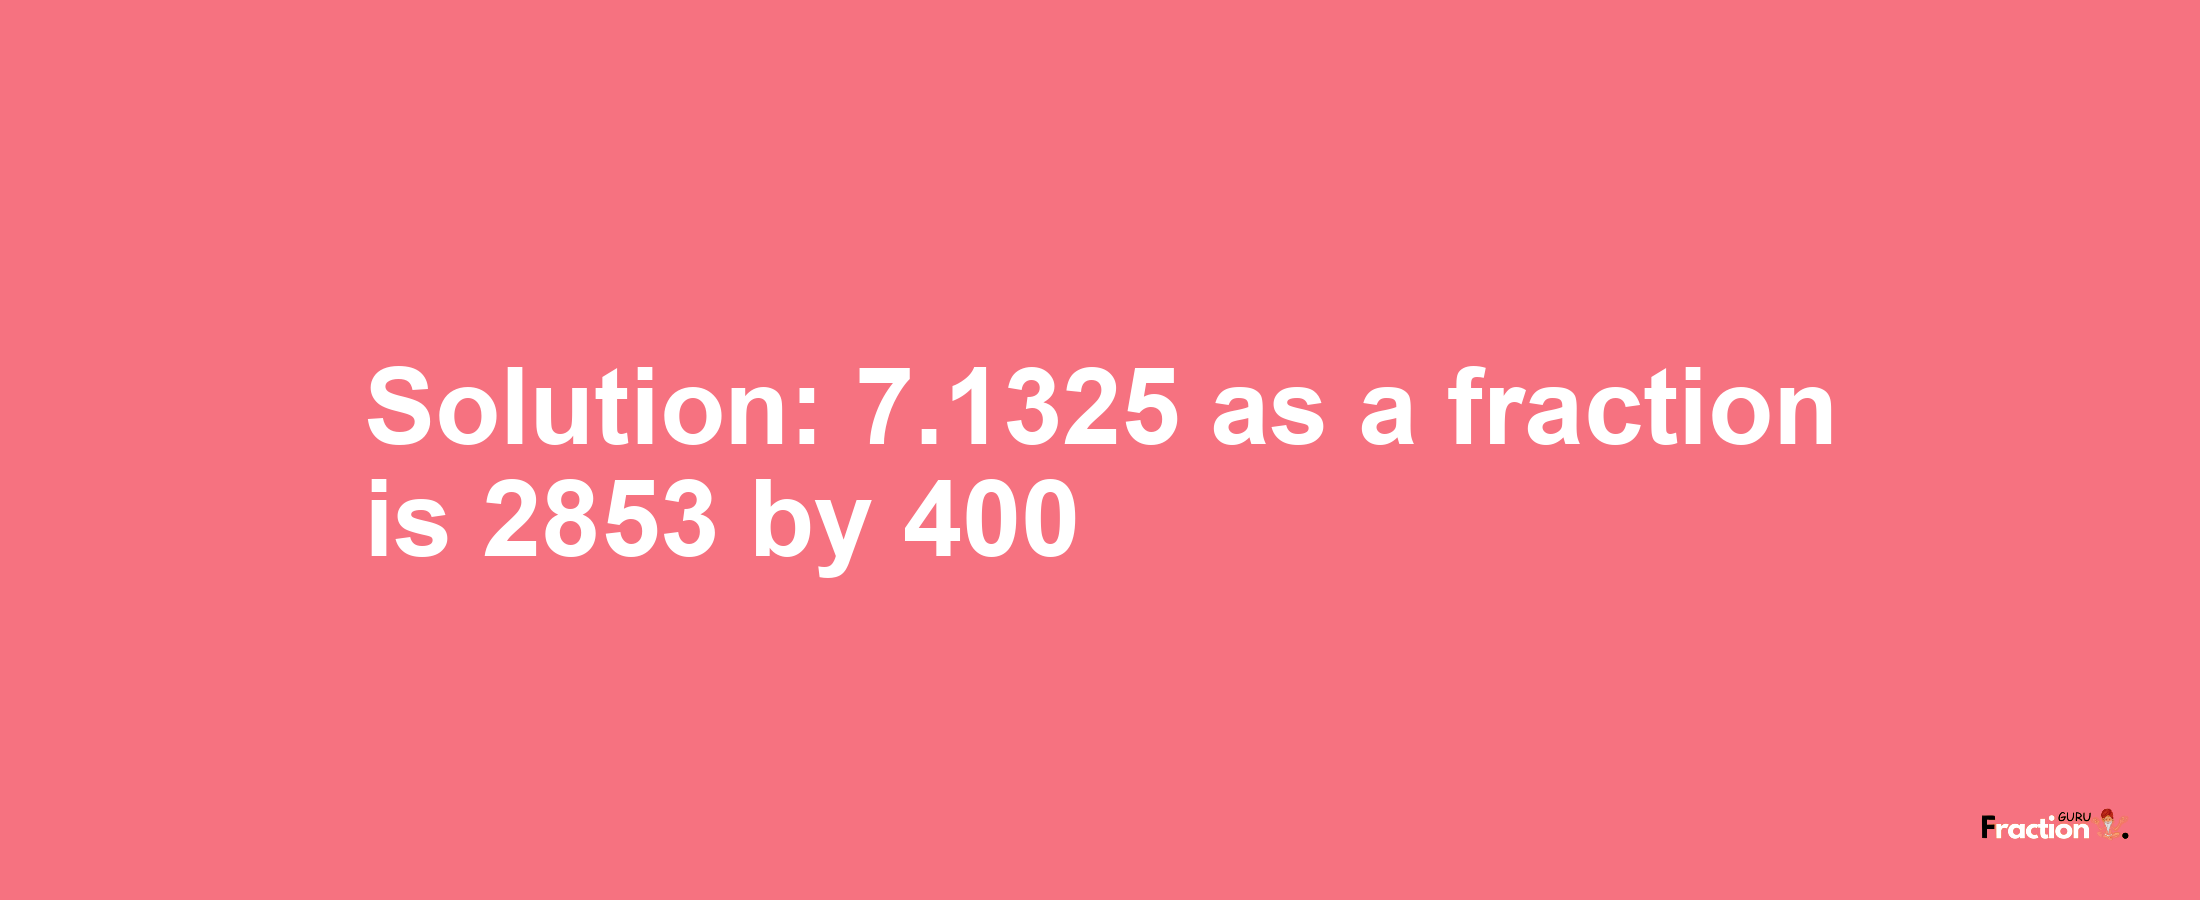 Solution:7.1325 as a fraction is 2853/400